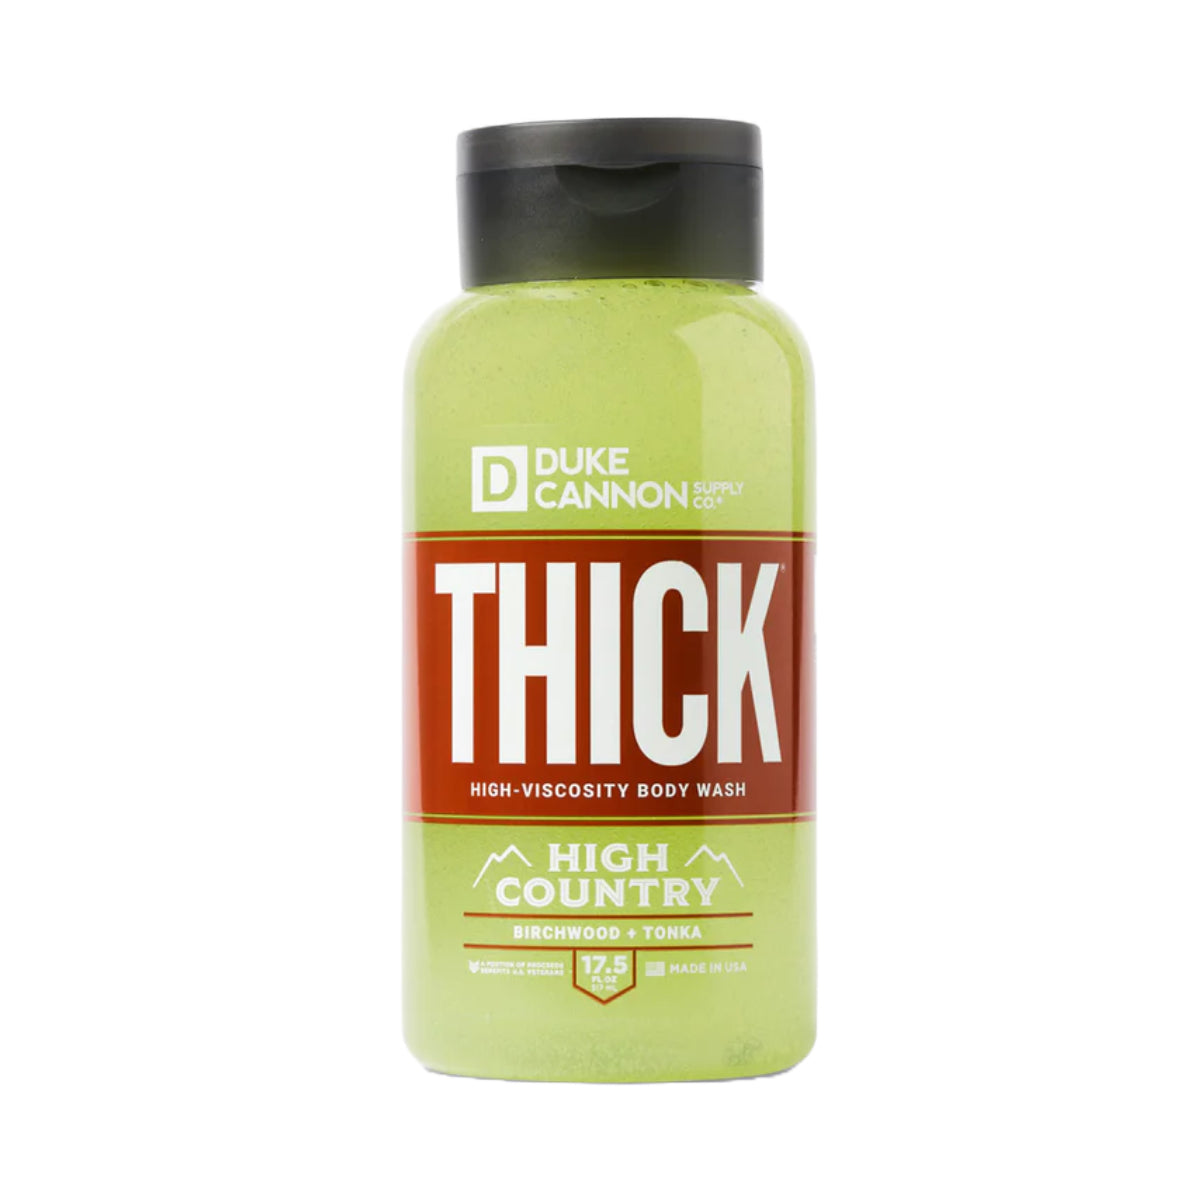 Thick High-Viscosity Body Wash | High Country